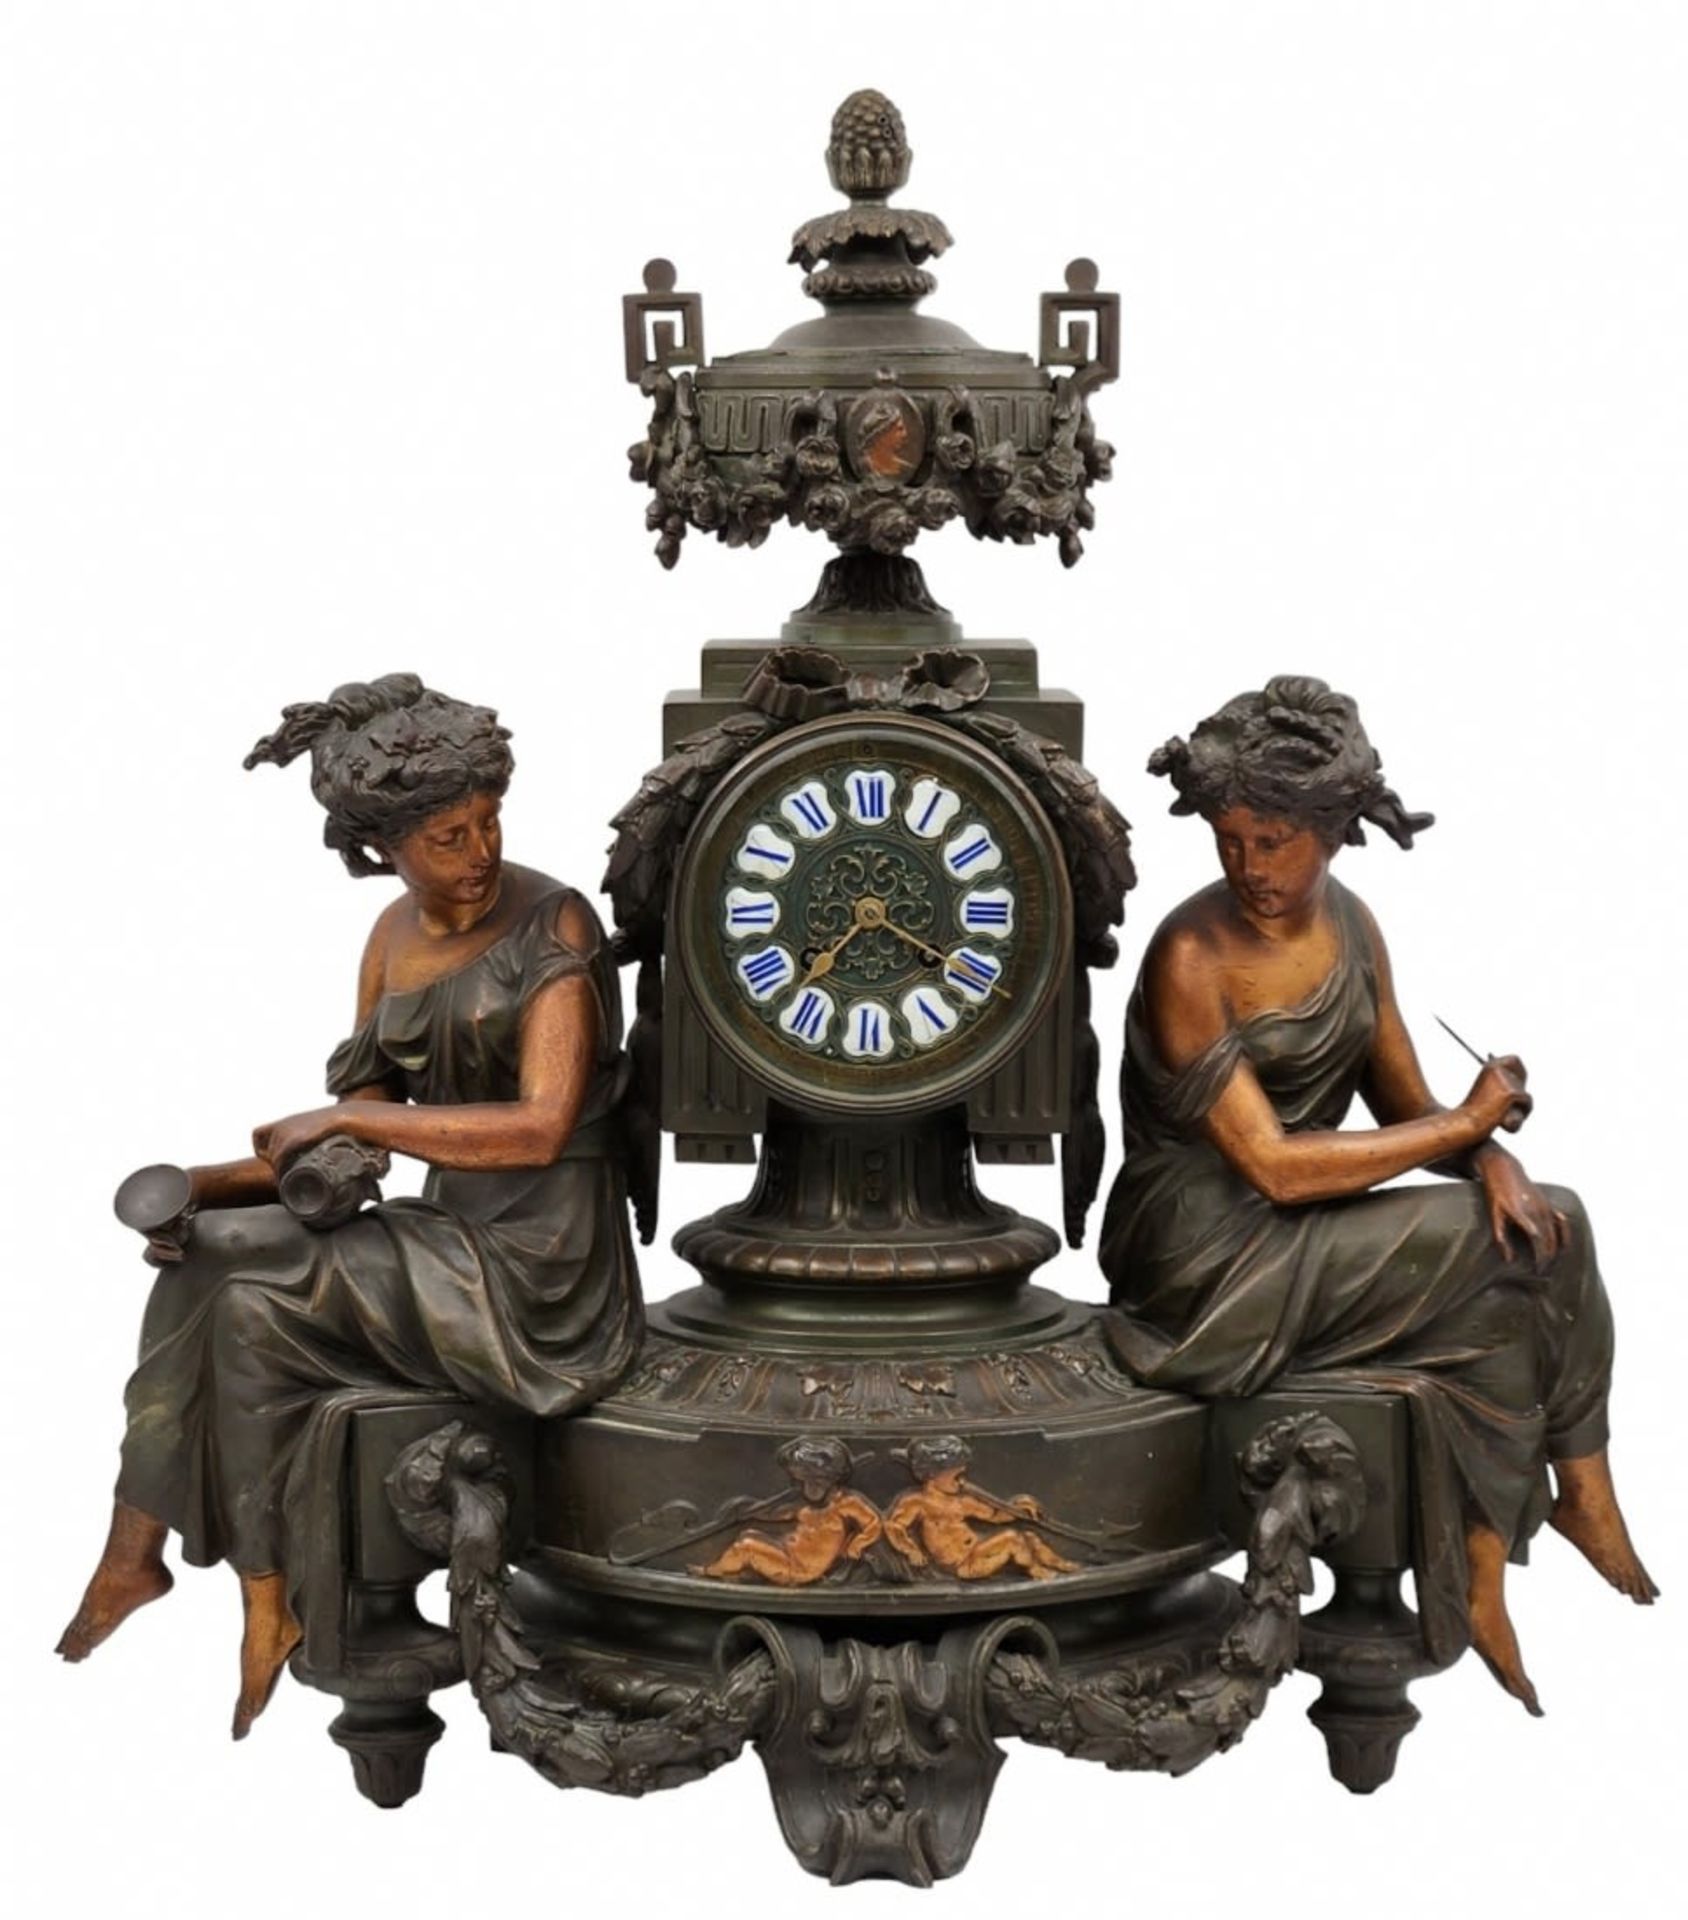 A high-quality and particularly impressive antique French mantel clock from the end of the 19th